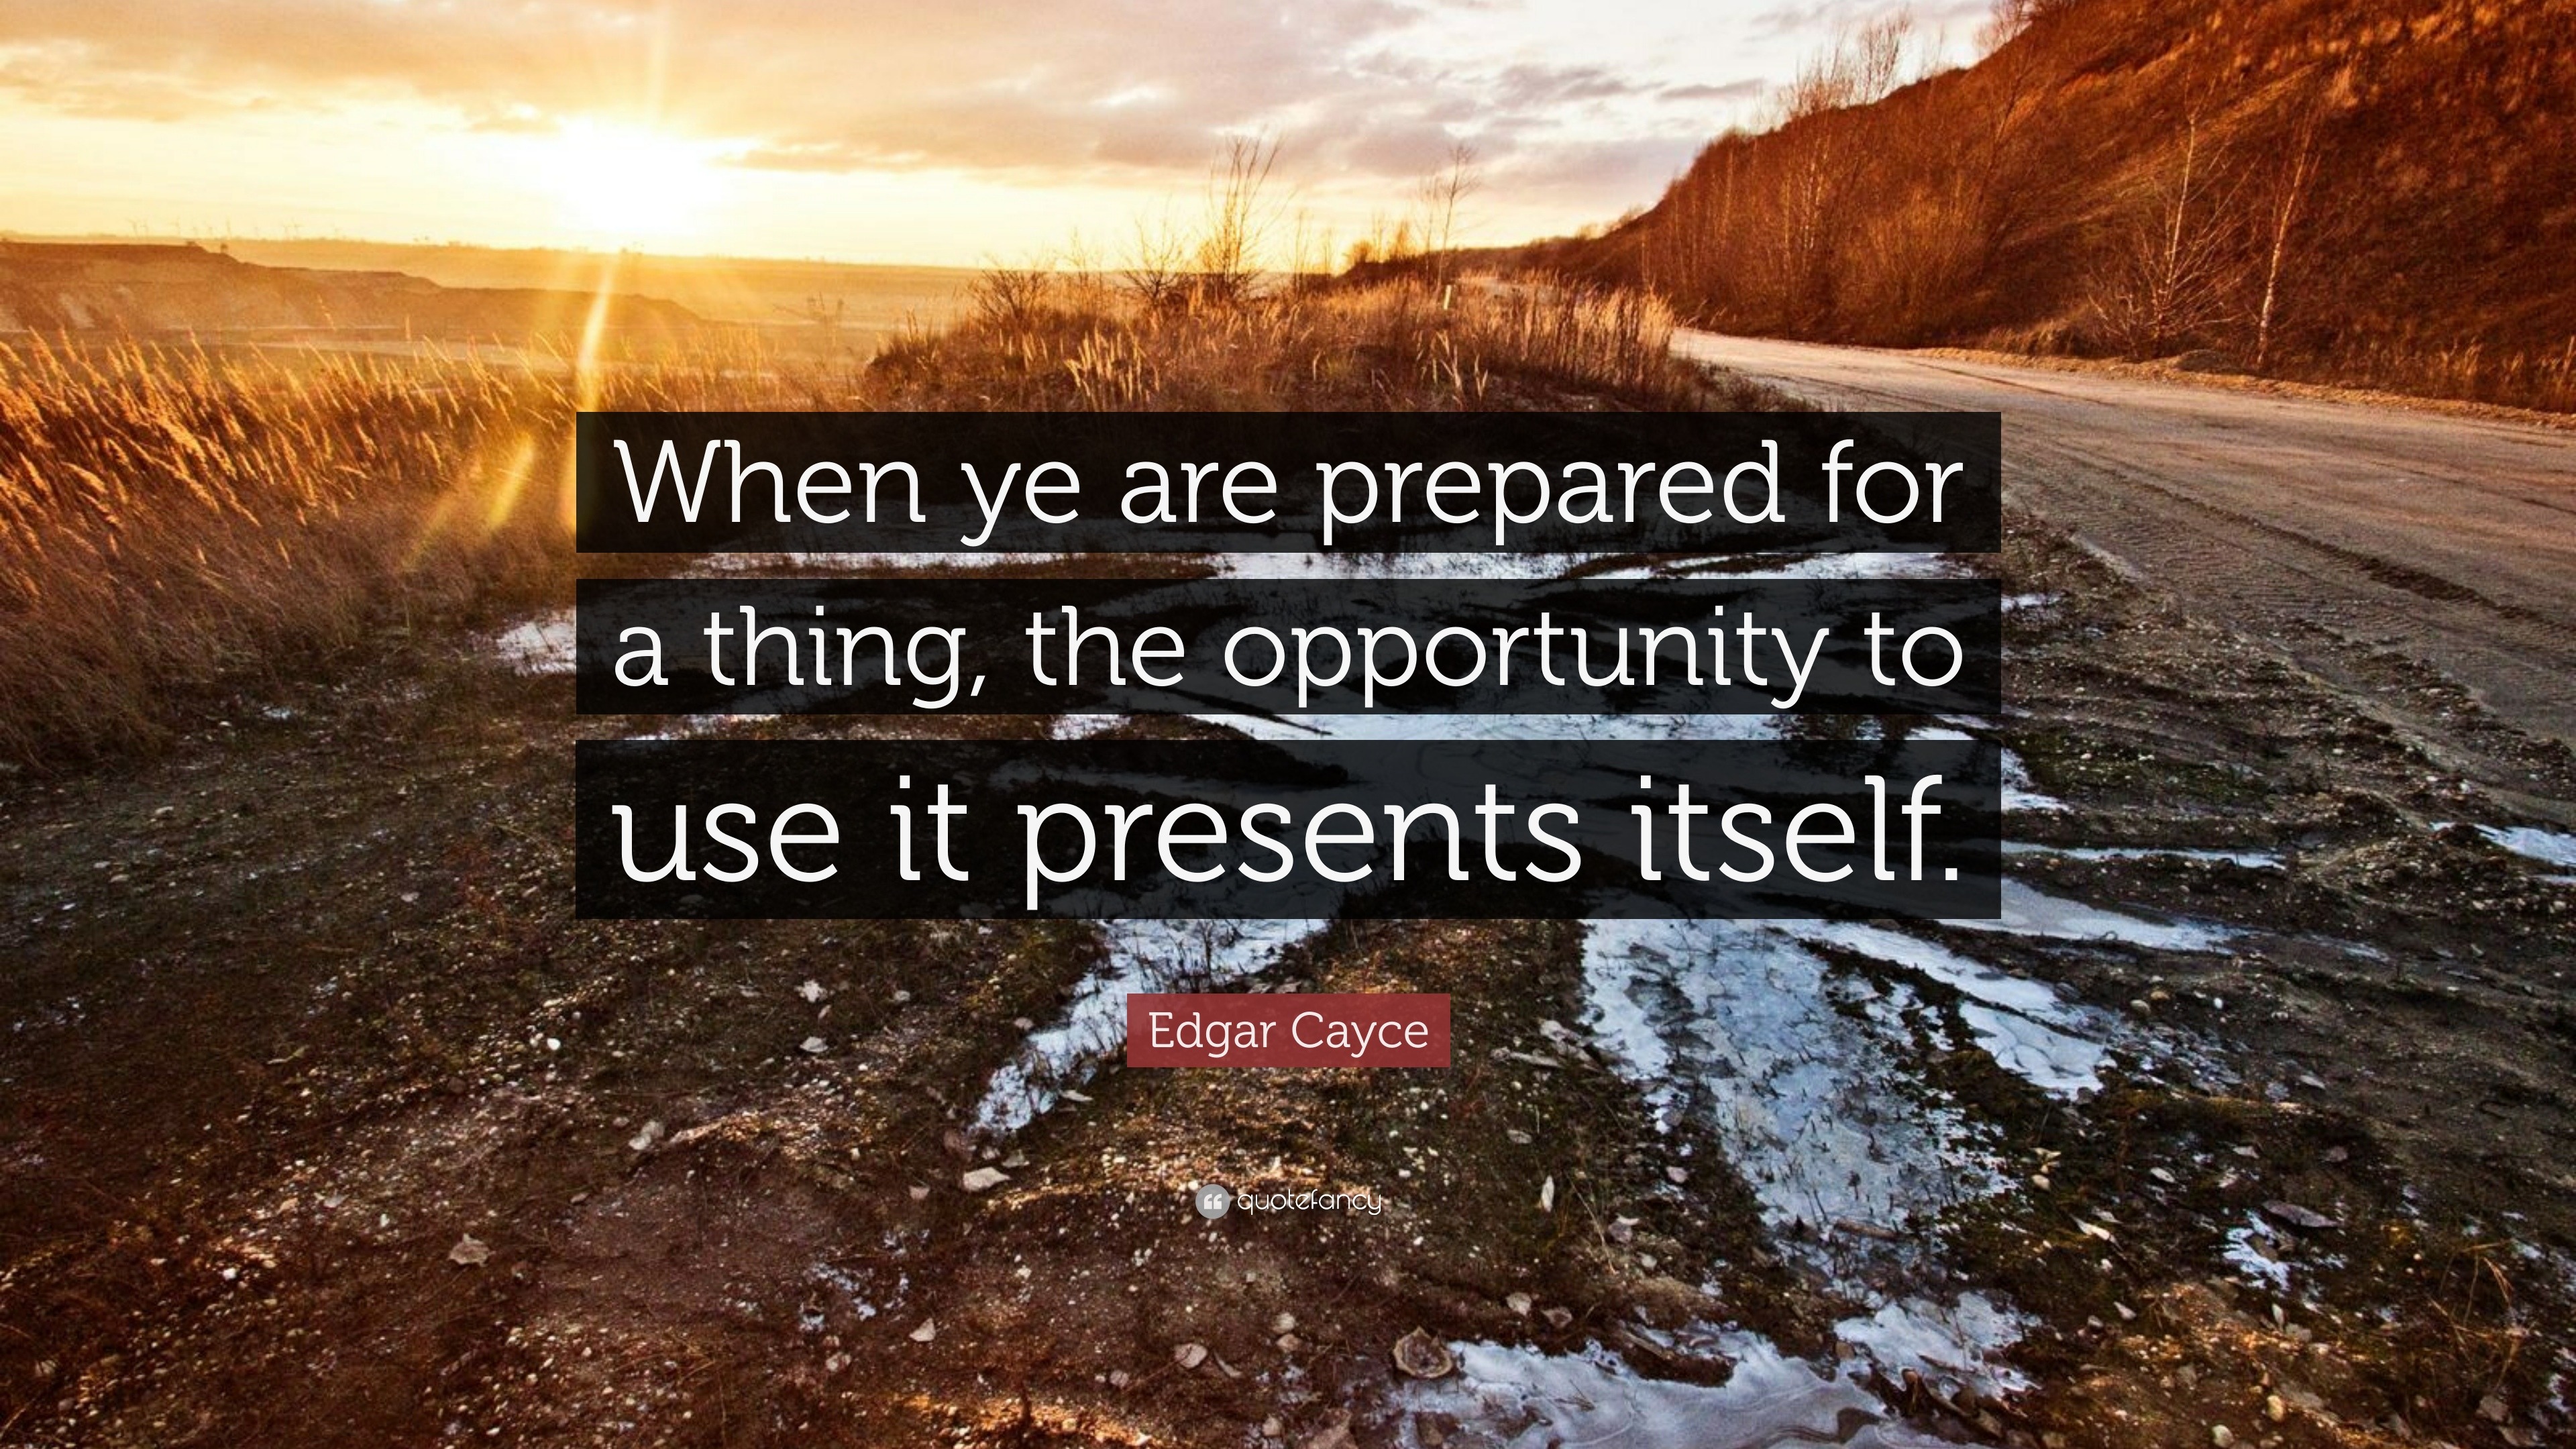 Edgar Cayce Quote: “When ye are prepared for a thing, the opportunity